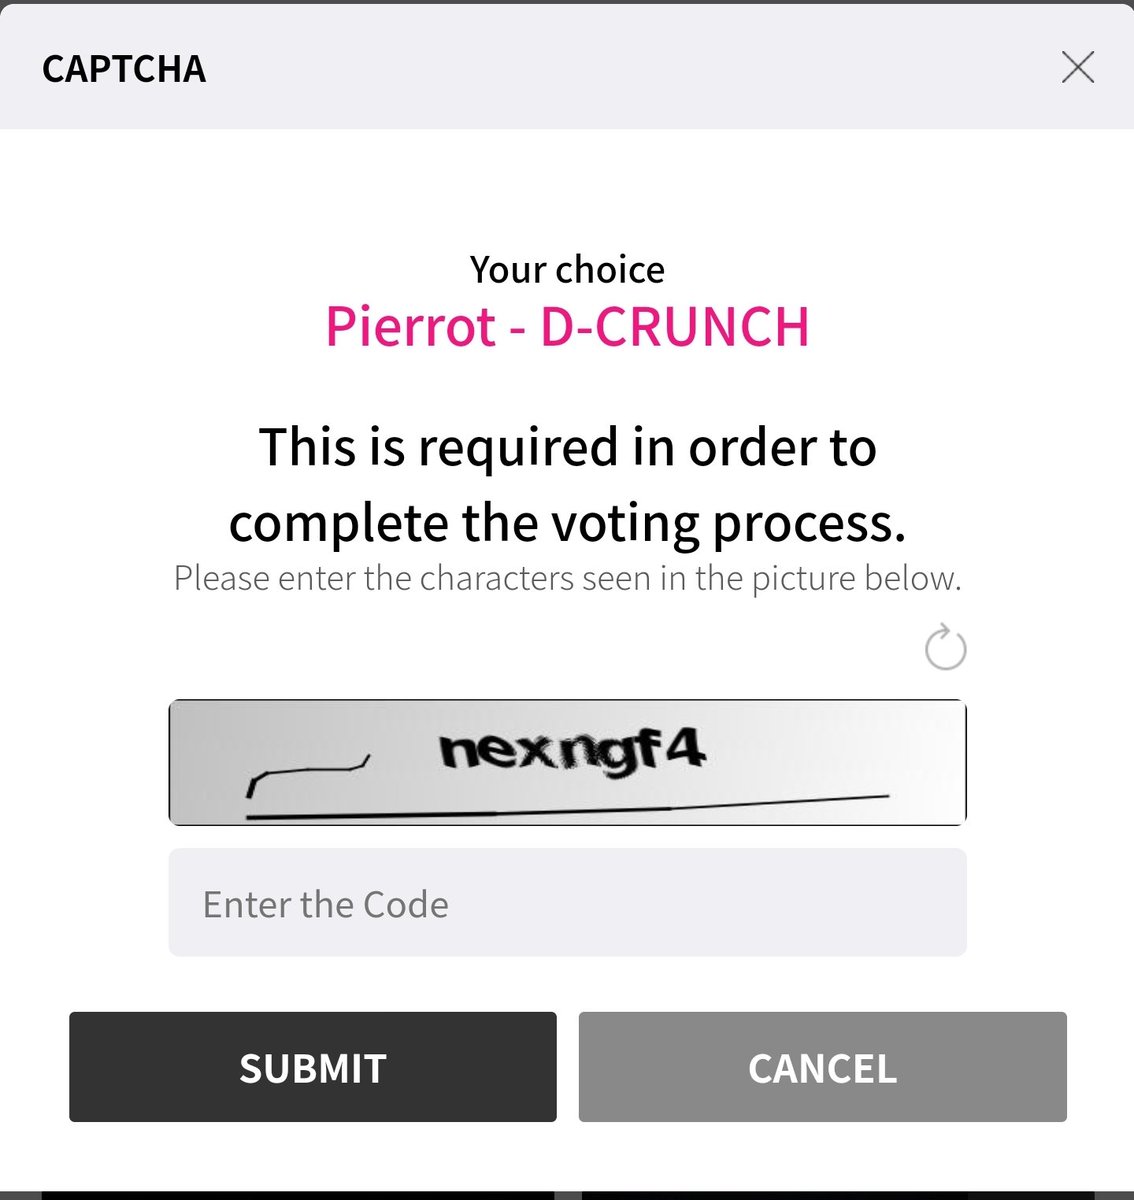 Click on Pierrot then click vote (pic #1). You will be asked to enter a captcha (what you see written in the silver box, in my pic ot is 'nexngf4'). Enter the captcha code and click SUBMIT. Once you've submitted, your vote will be counted.